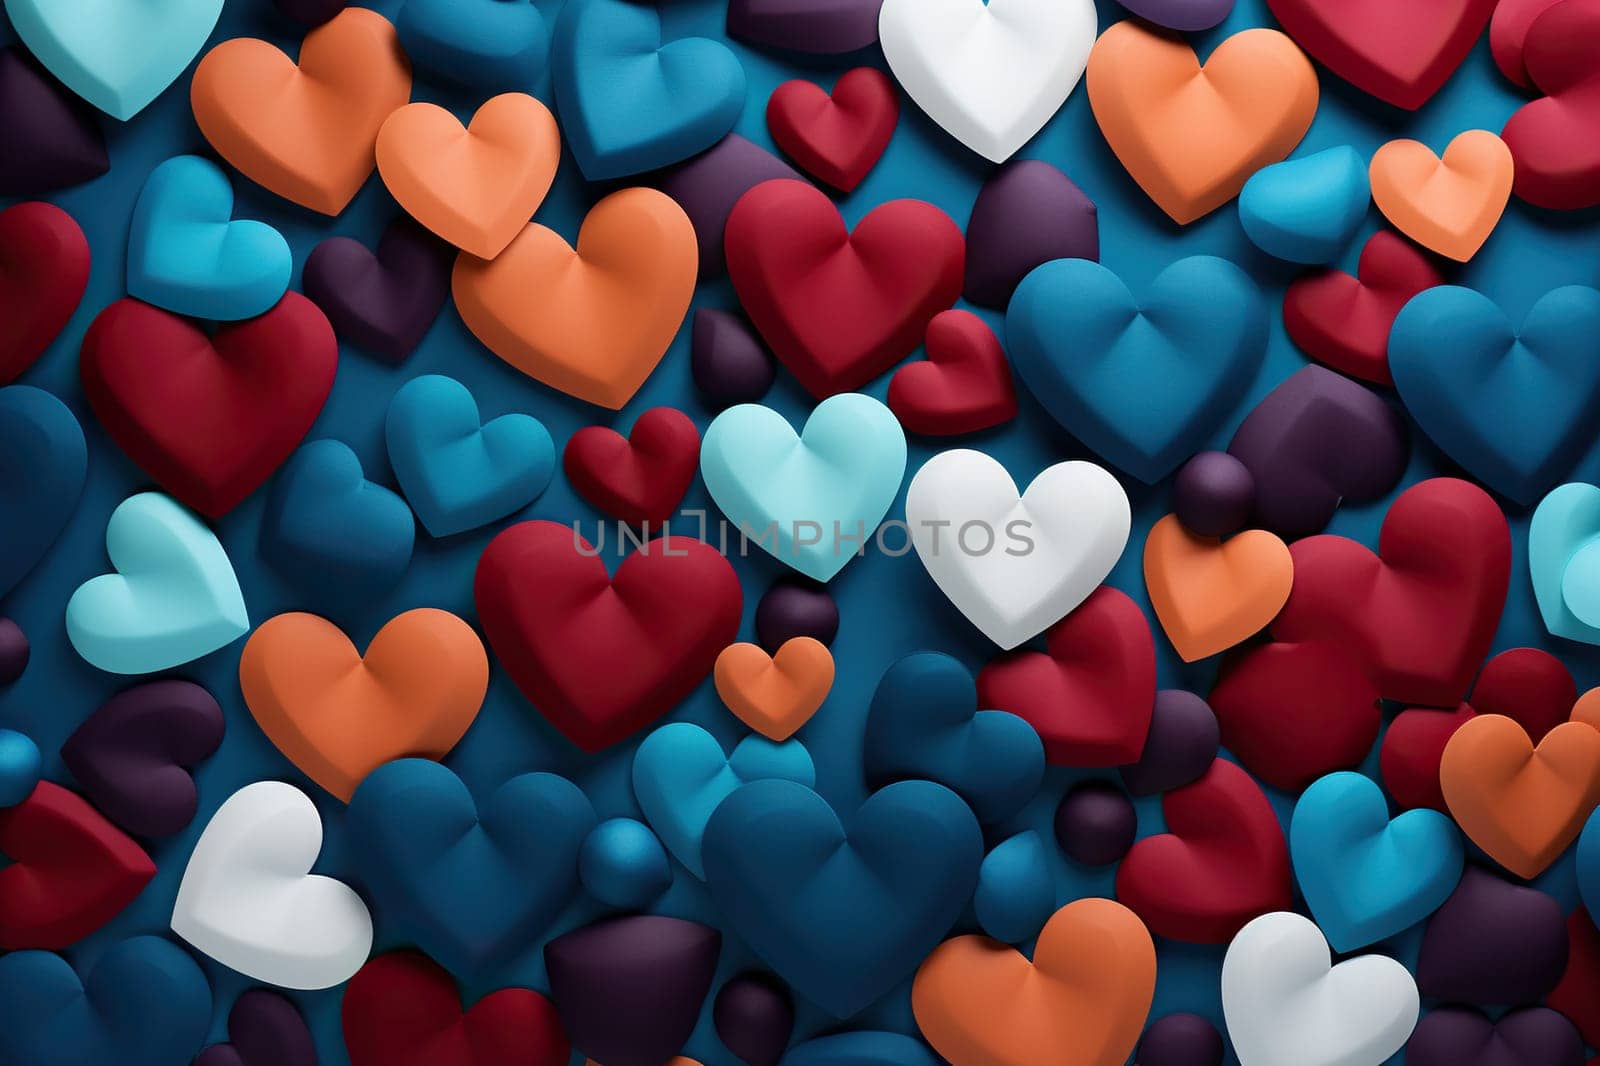 Horizontal background with paper hearts of different colors.